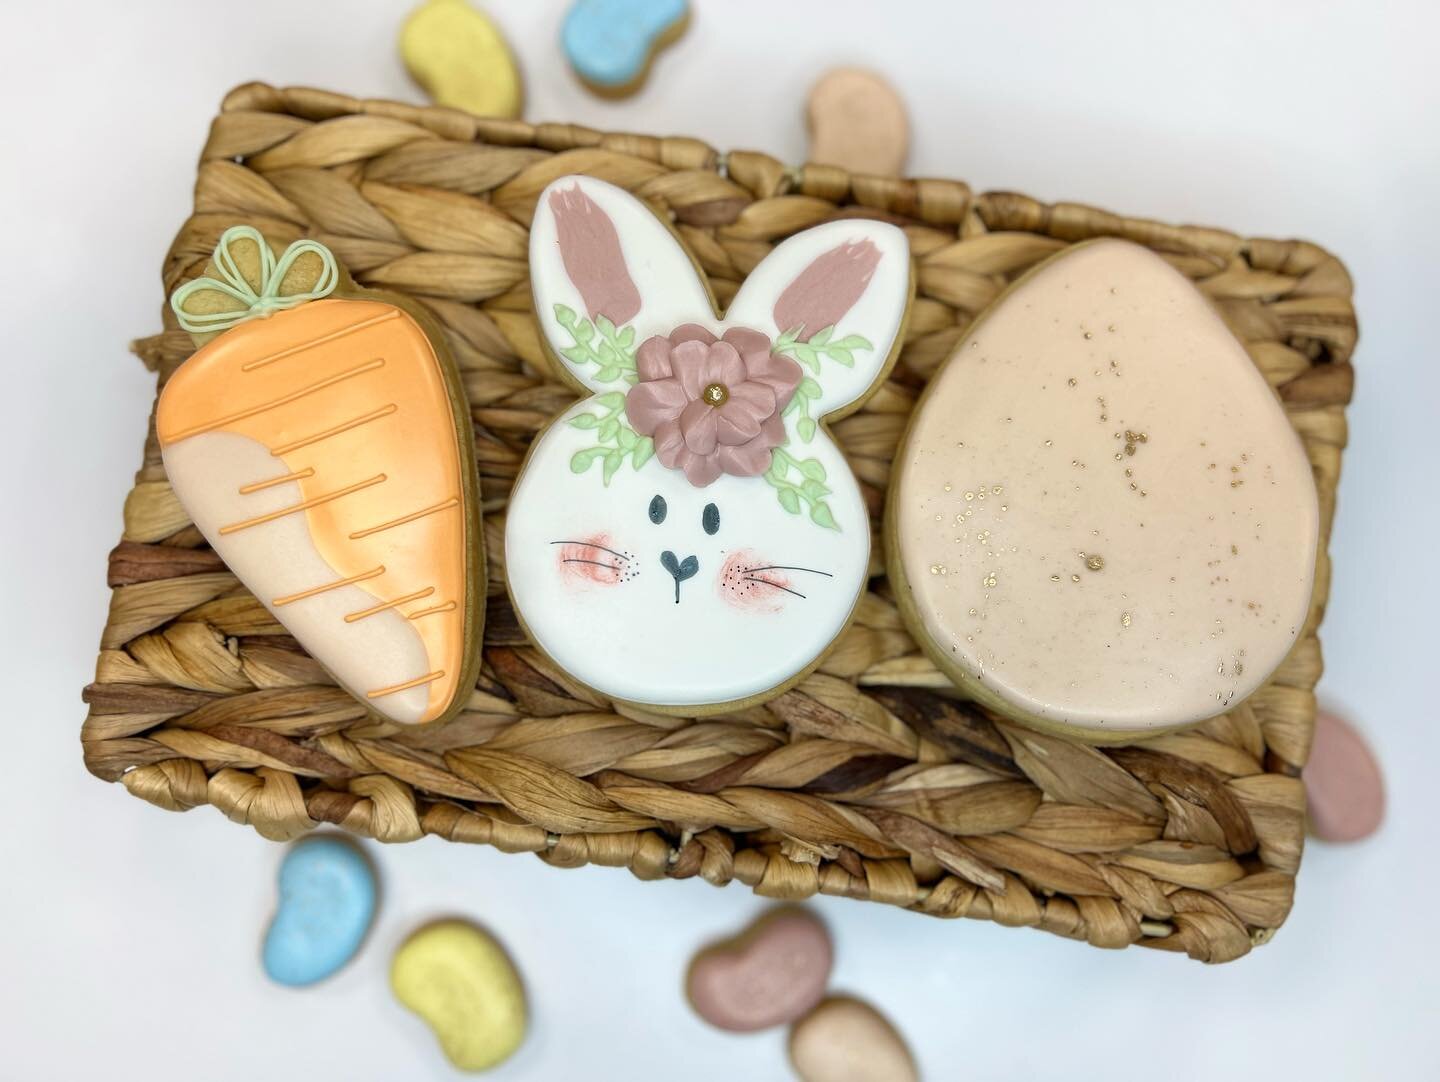 Easter is right around the corner! Don't forget to pre order your sweet treats! 

#buffalo #buffalony #easter #easterdessert #cookies #bunny #cute #buffalobakery